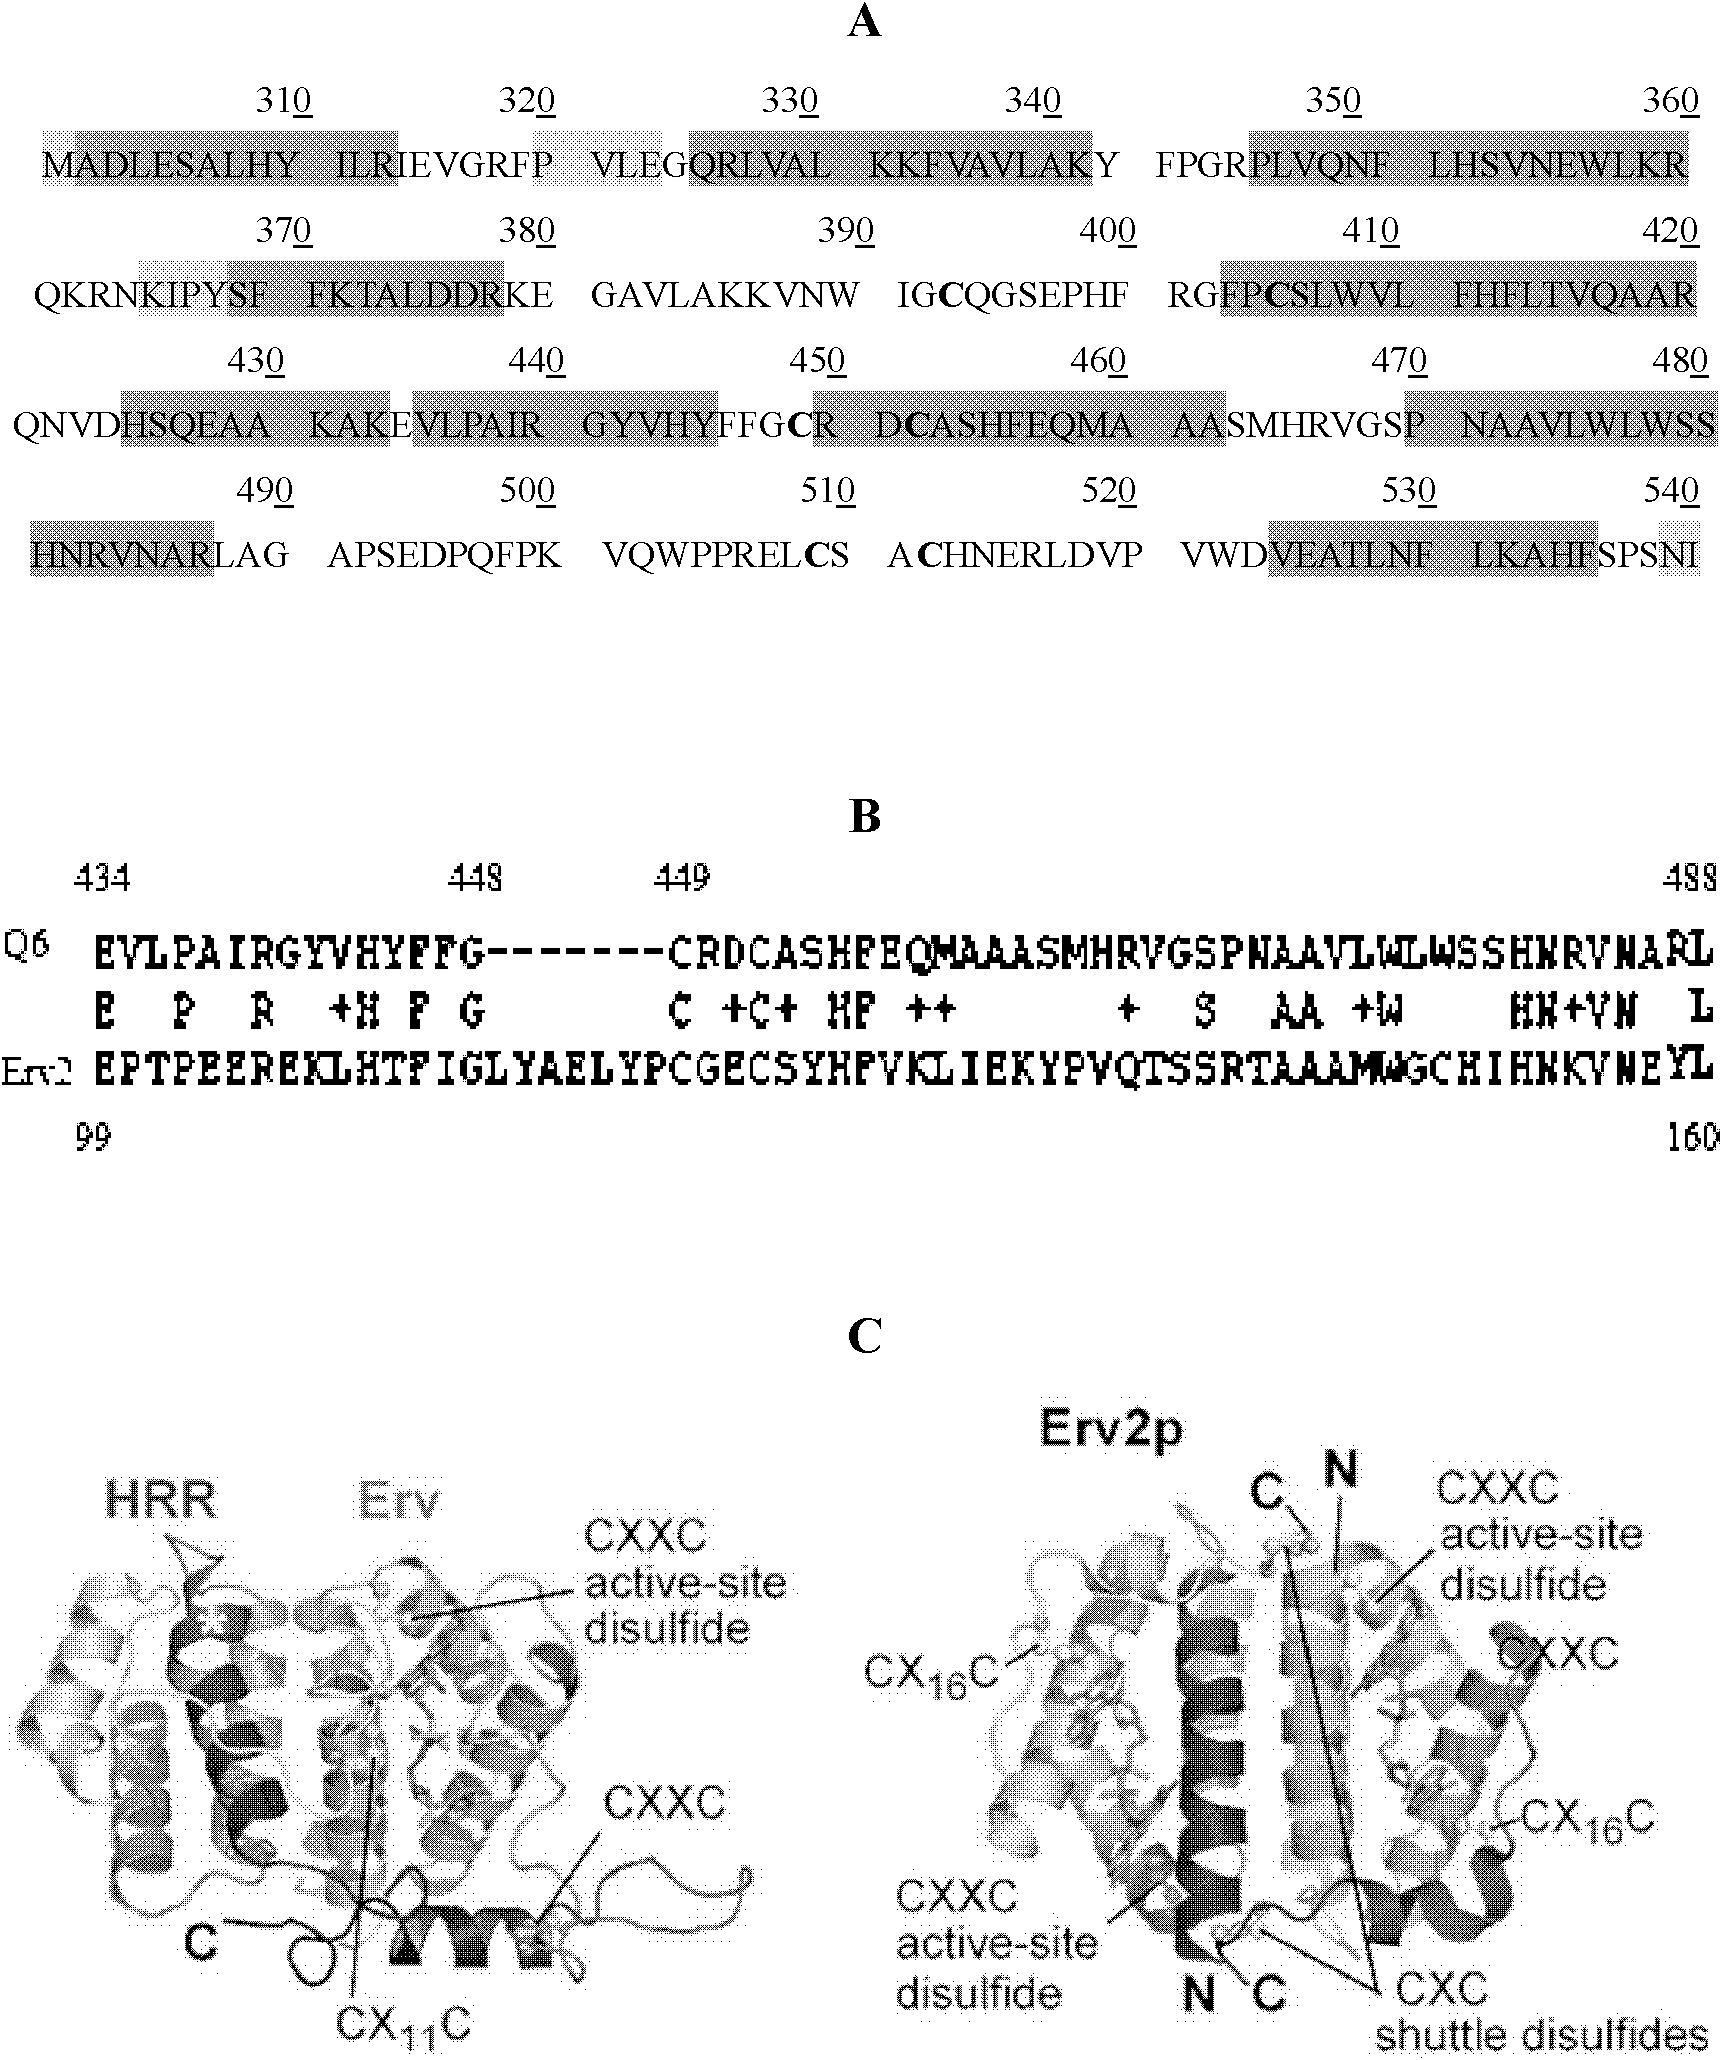 Polygene coexpression system and production method containing disulfide-bond functional protein